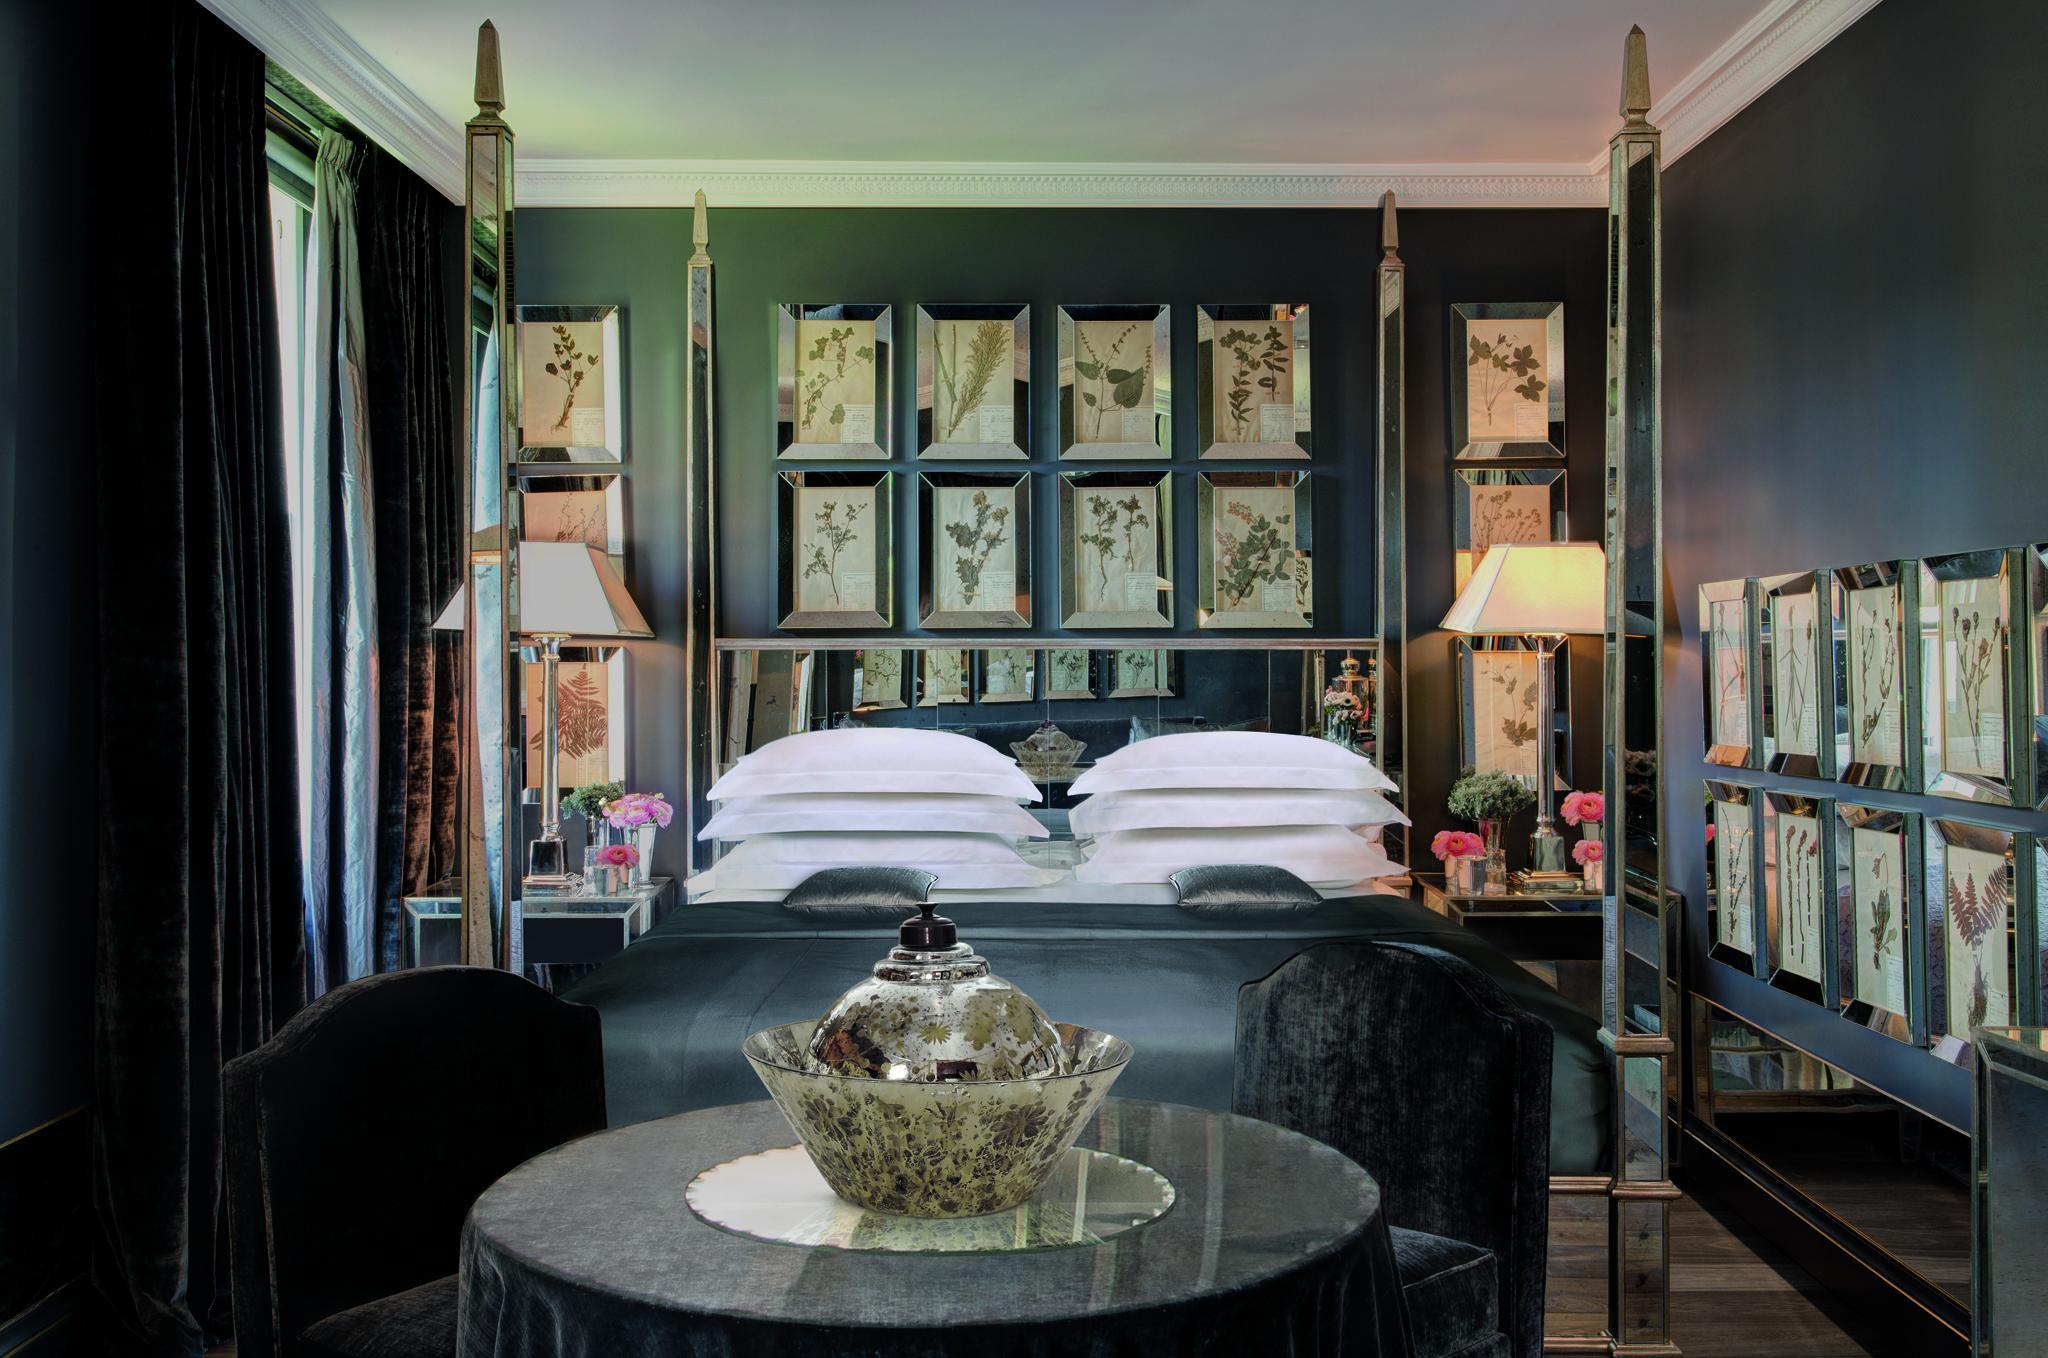 The interiors of the Franklin in London have been revamped by Anouska Hempel